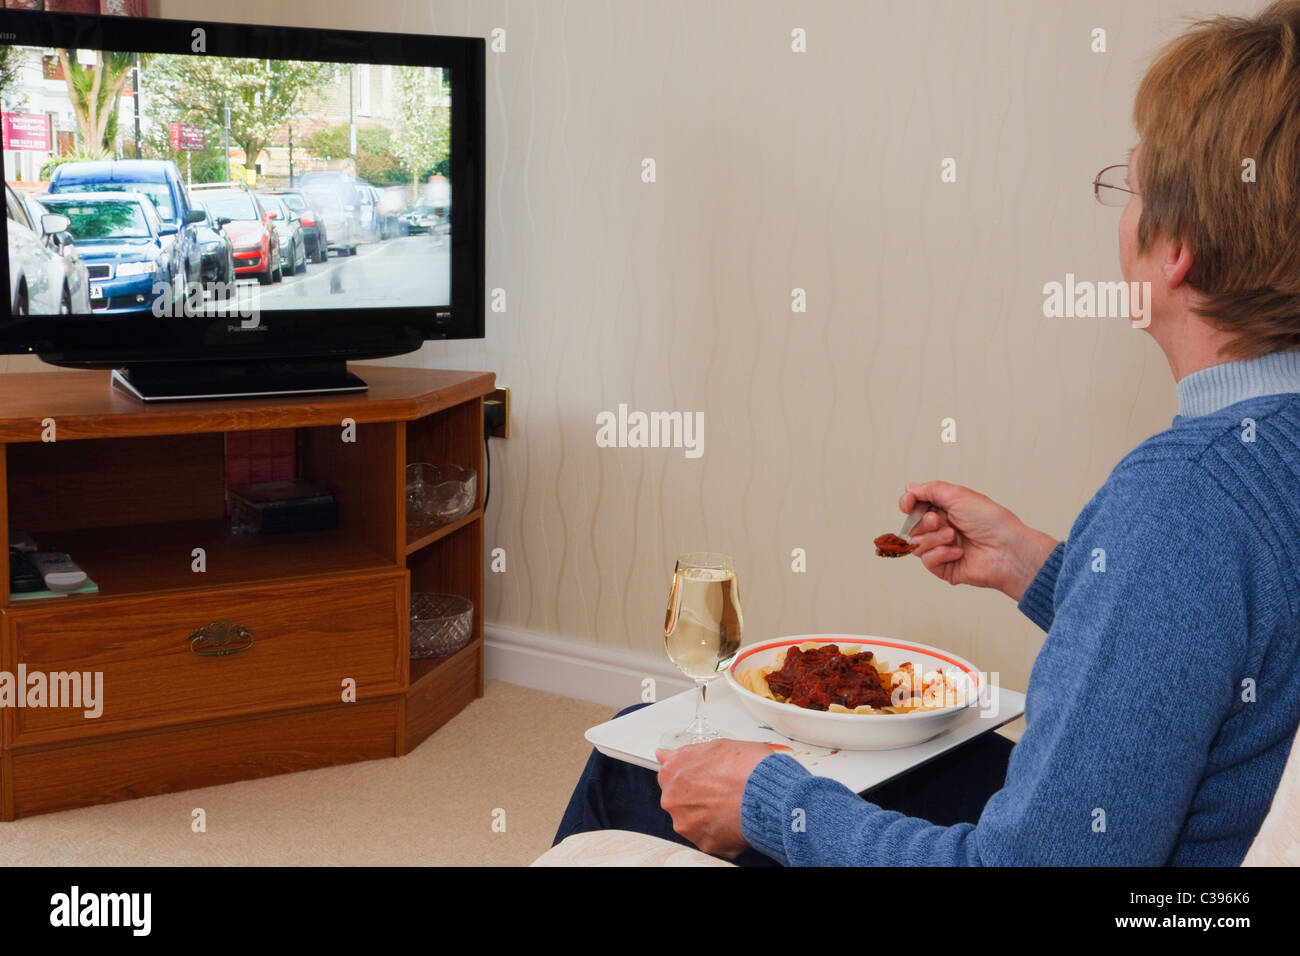 Everyday scene of a mature woman sitting alone in front of a television eating an evening TV meal with glass of wine on a lap tray. England UK Britain Stock Photo